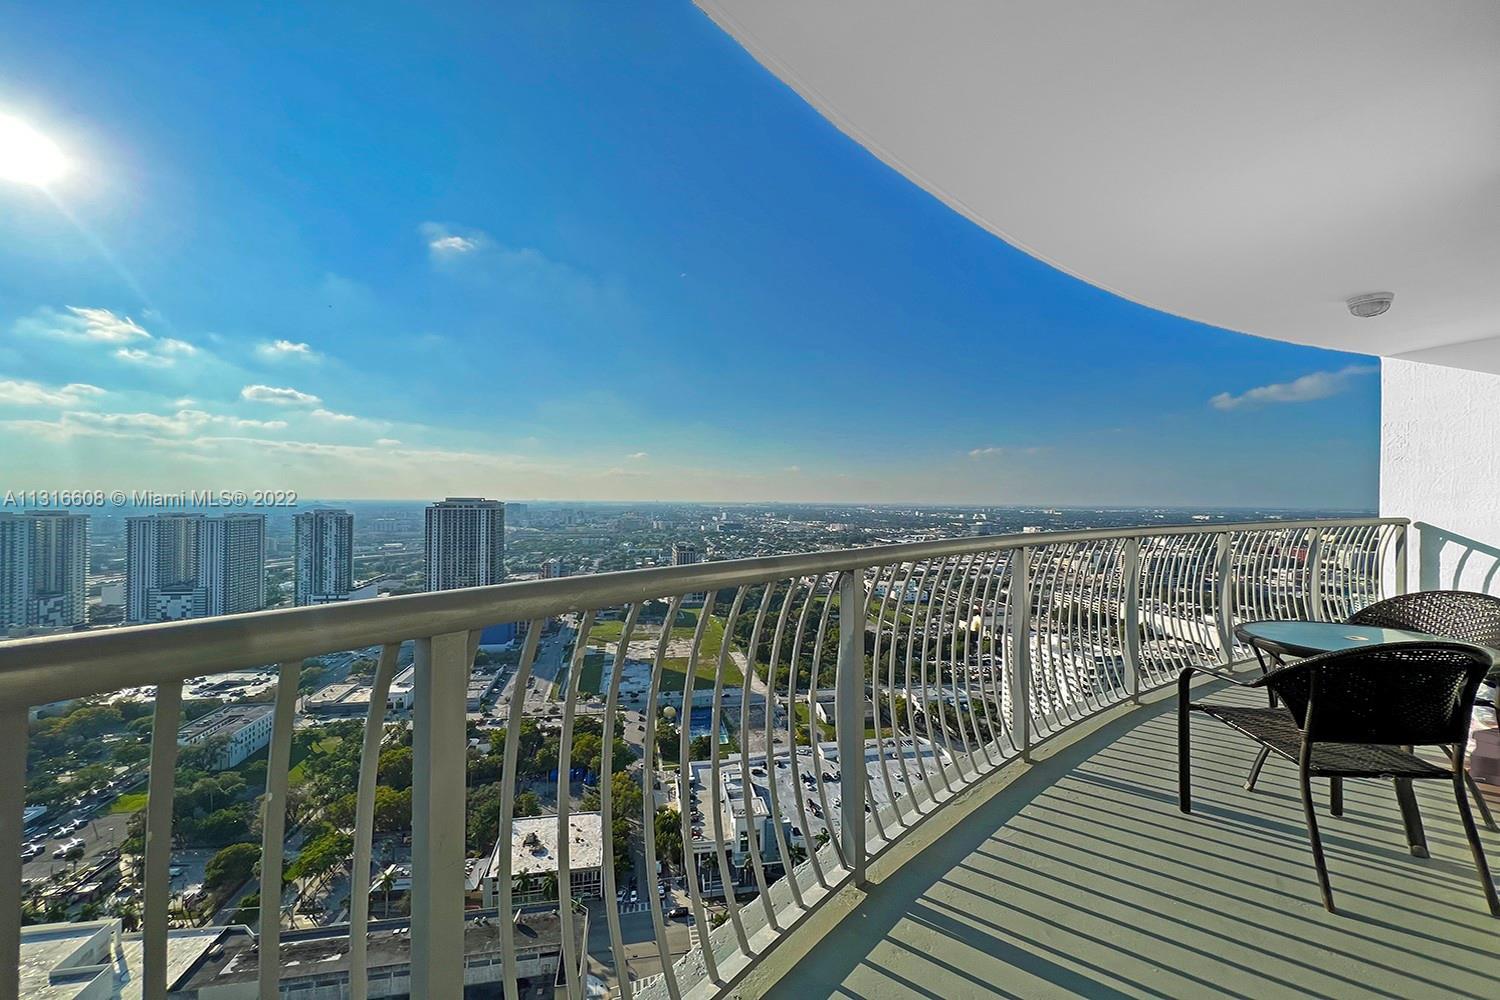 Opera Tower is located in one of Miami's most sought after locations, Edgewater. Enjoy amazing water